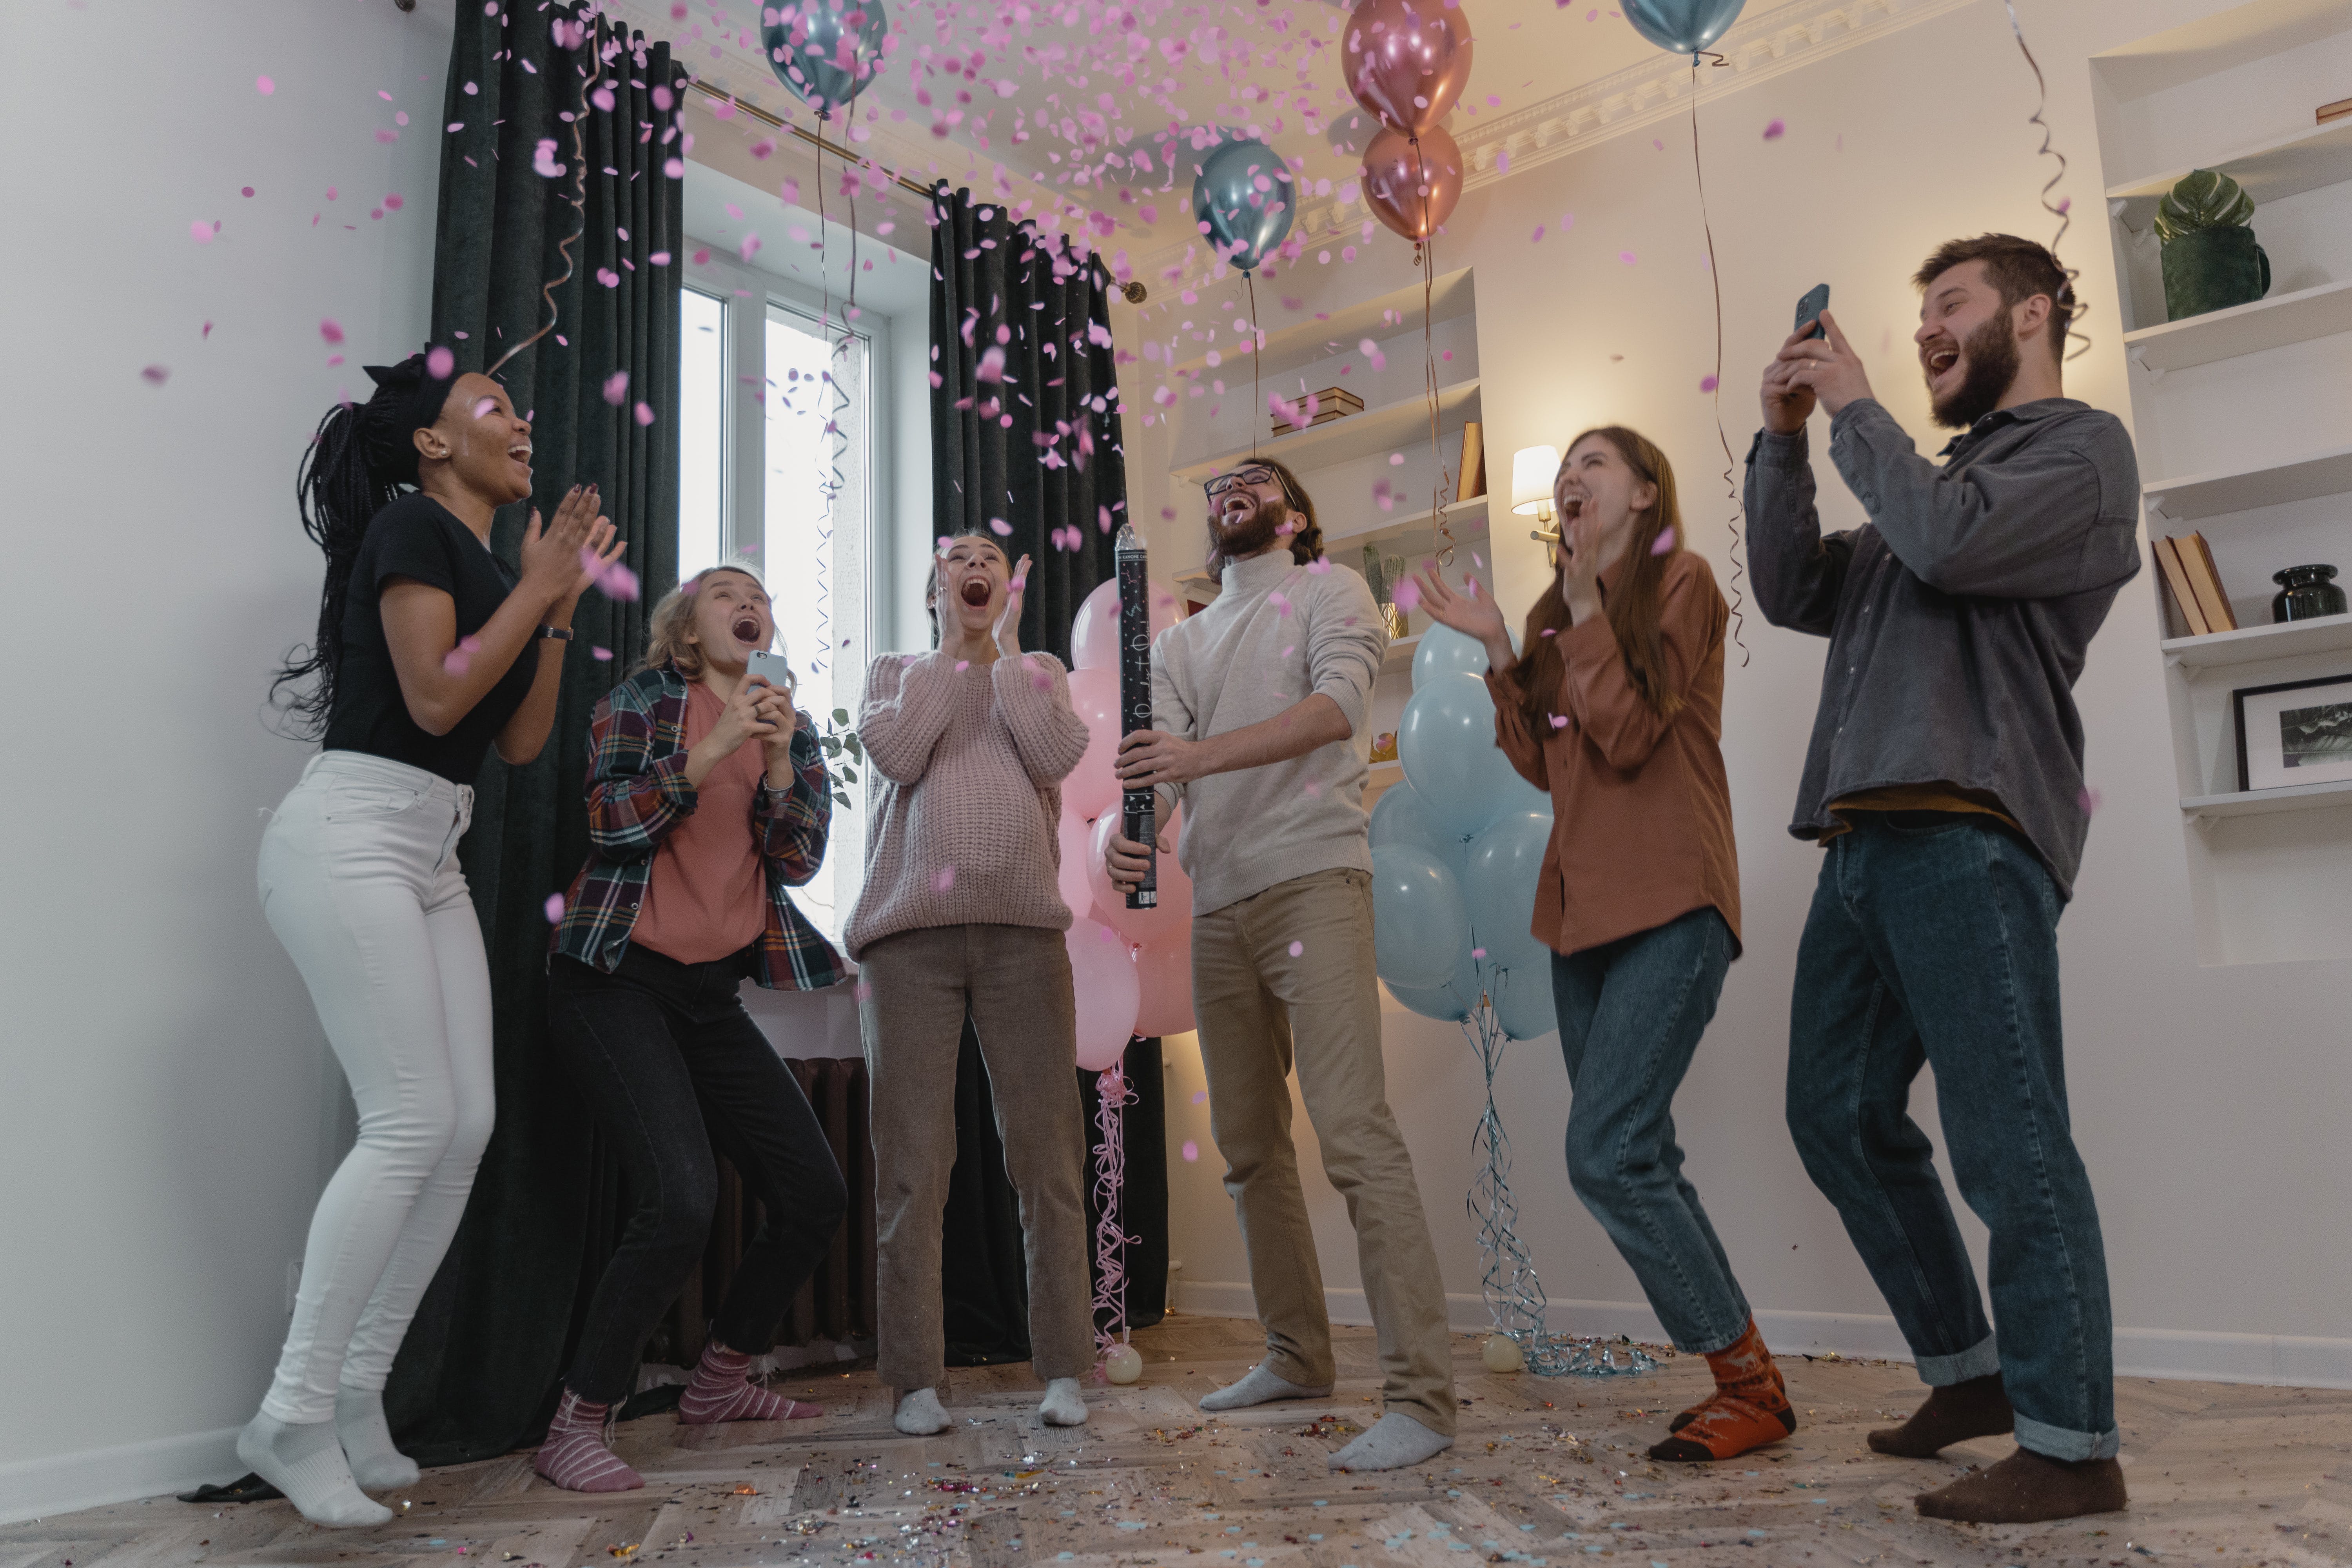 A group of people having a gender reveal party | Source: Pexels